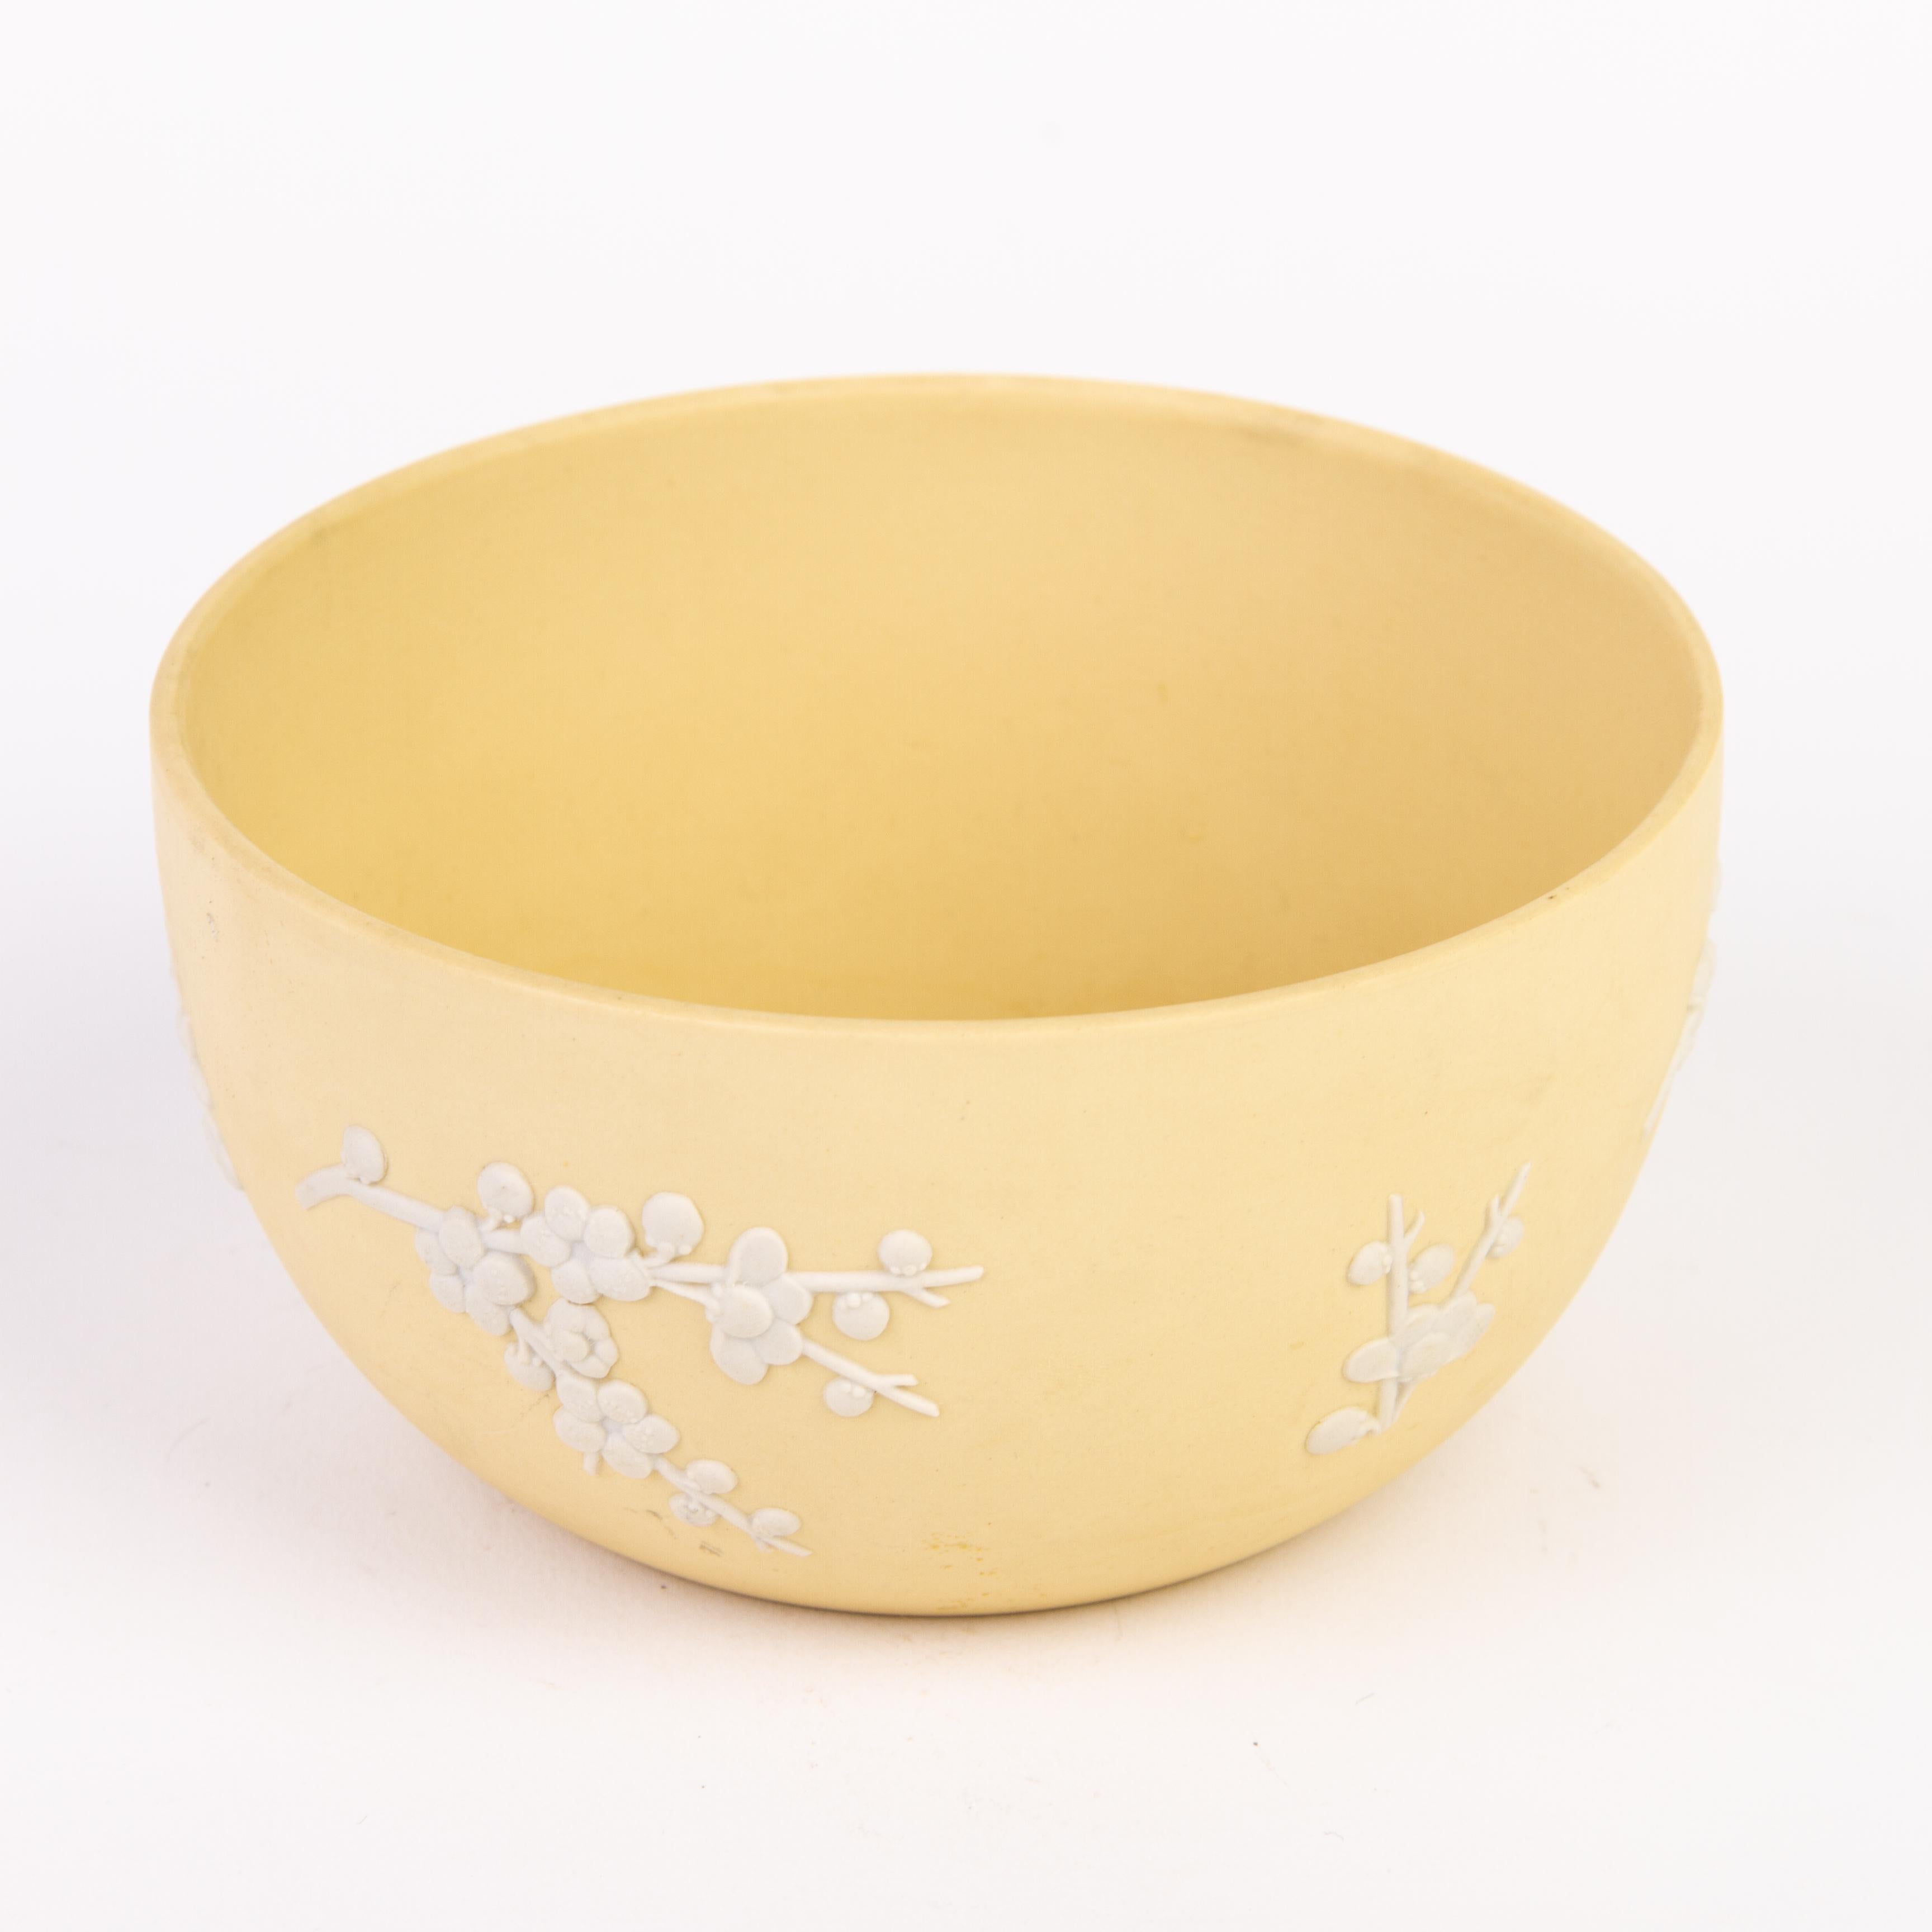 From a private collection.
Free international shipping.
Wedgwood Primrose Yellow Jasperware Prunus Bowl 